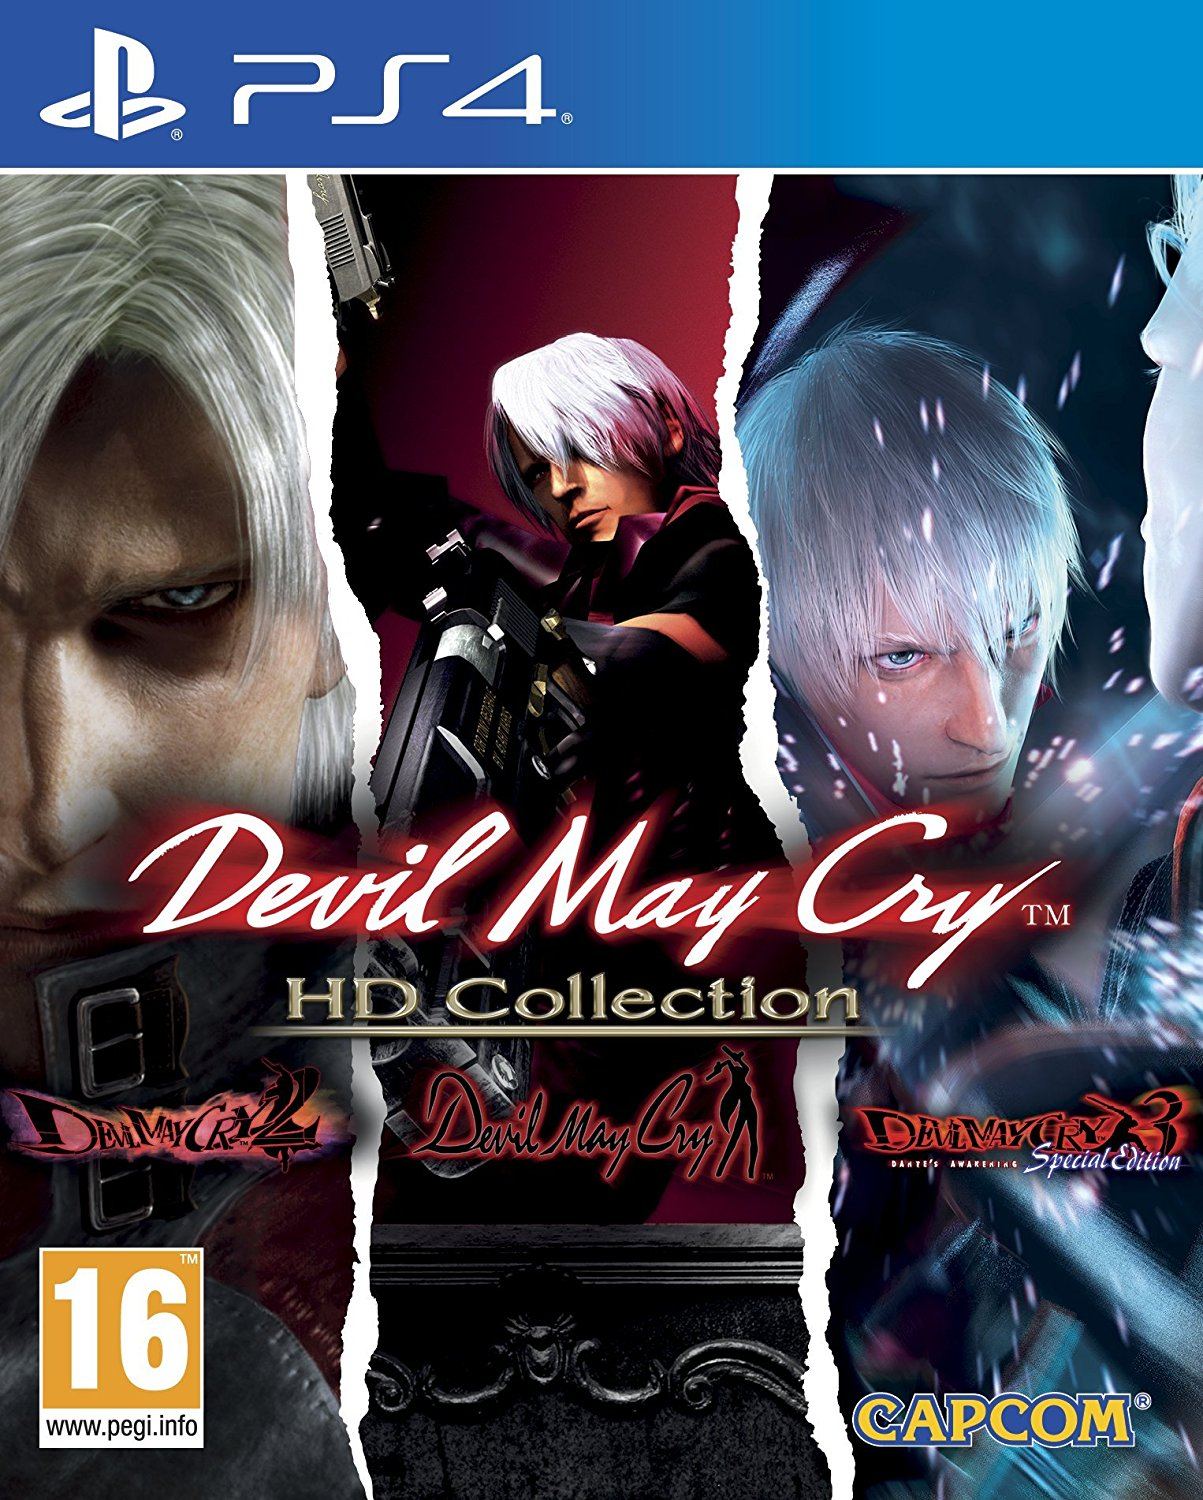 Devil May Cry 3: Special Edition - PS2 - PT BR + Link 